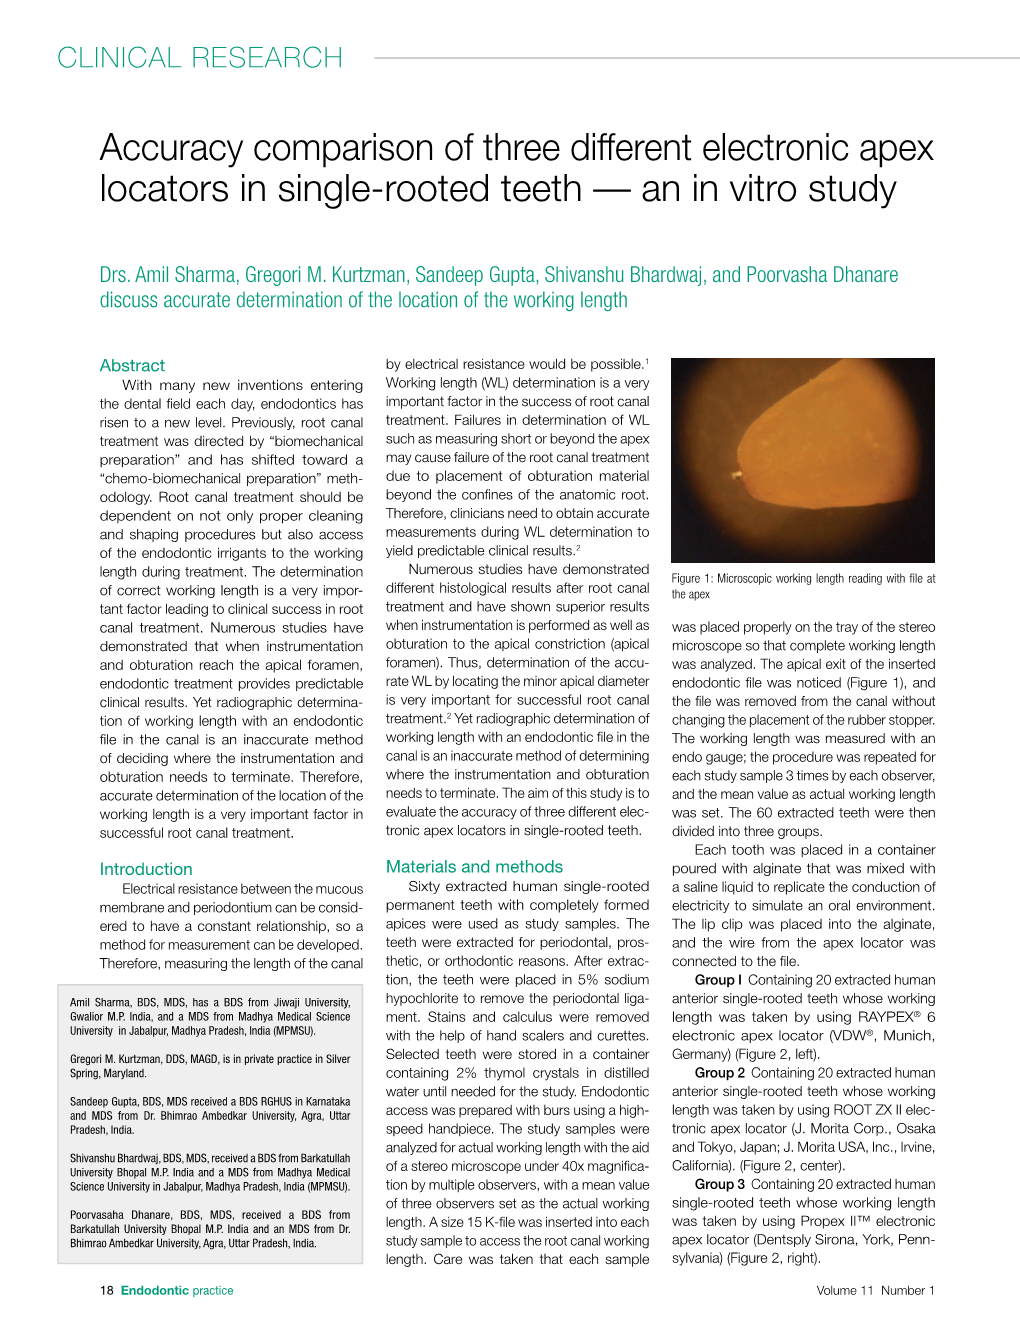 Accuracy Comparison of Three Different Electronic Apex Locators in Single-Rooted Teeth — an in Vitro Study